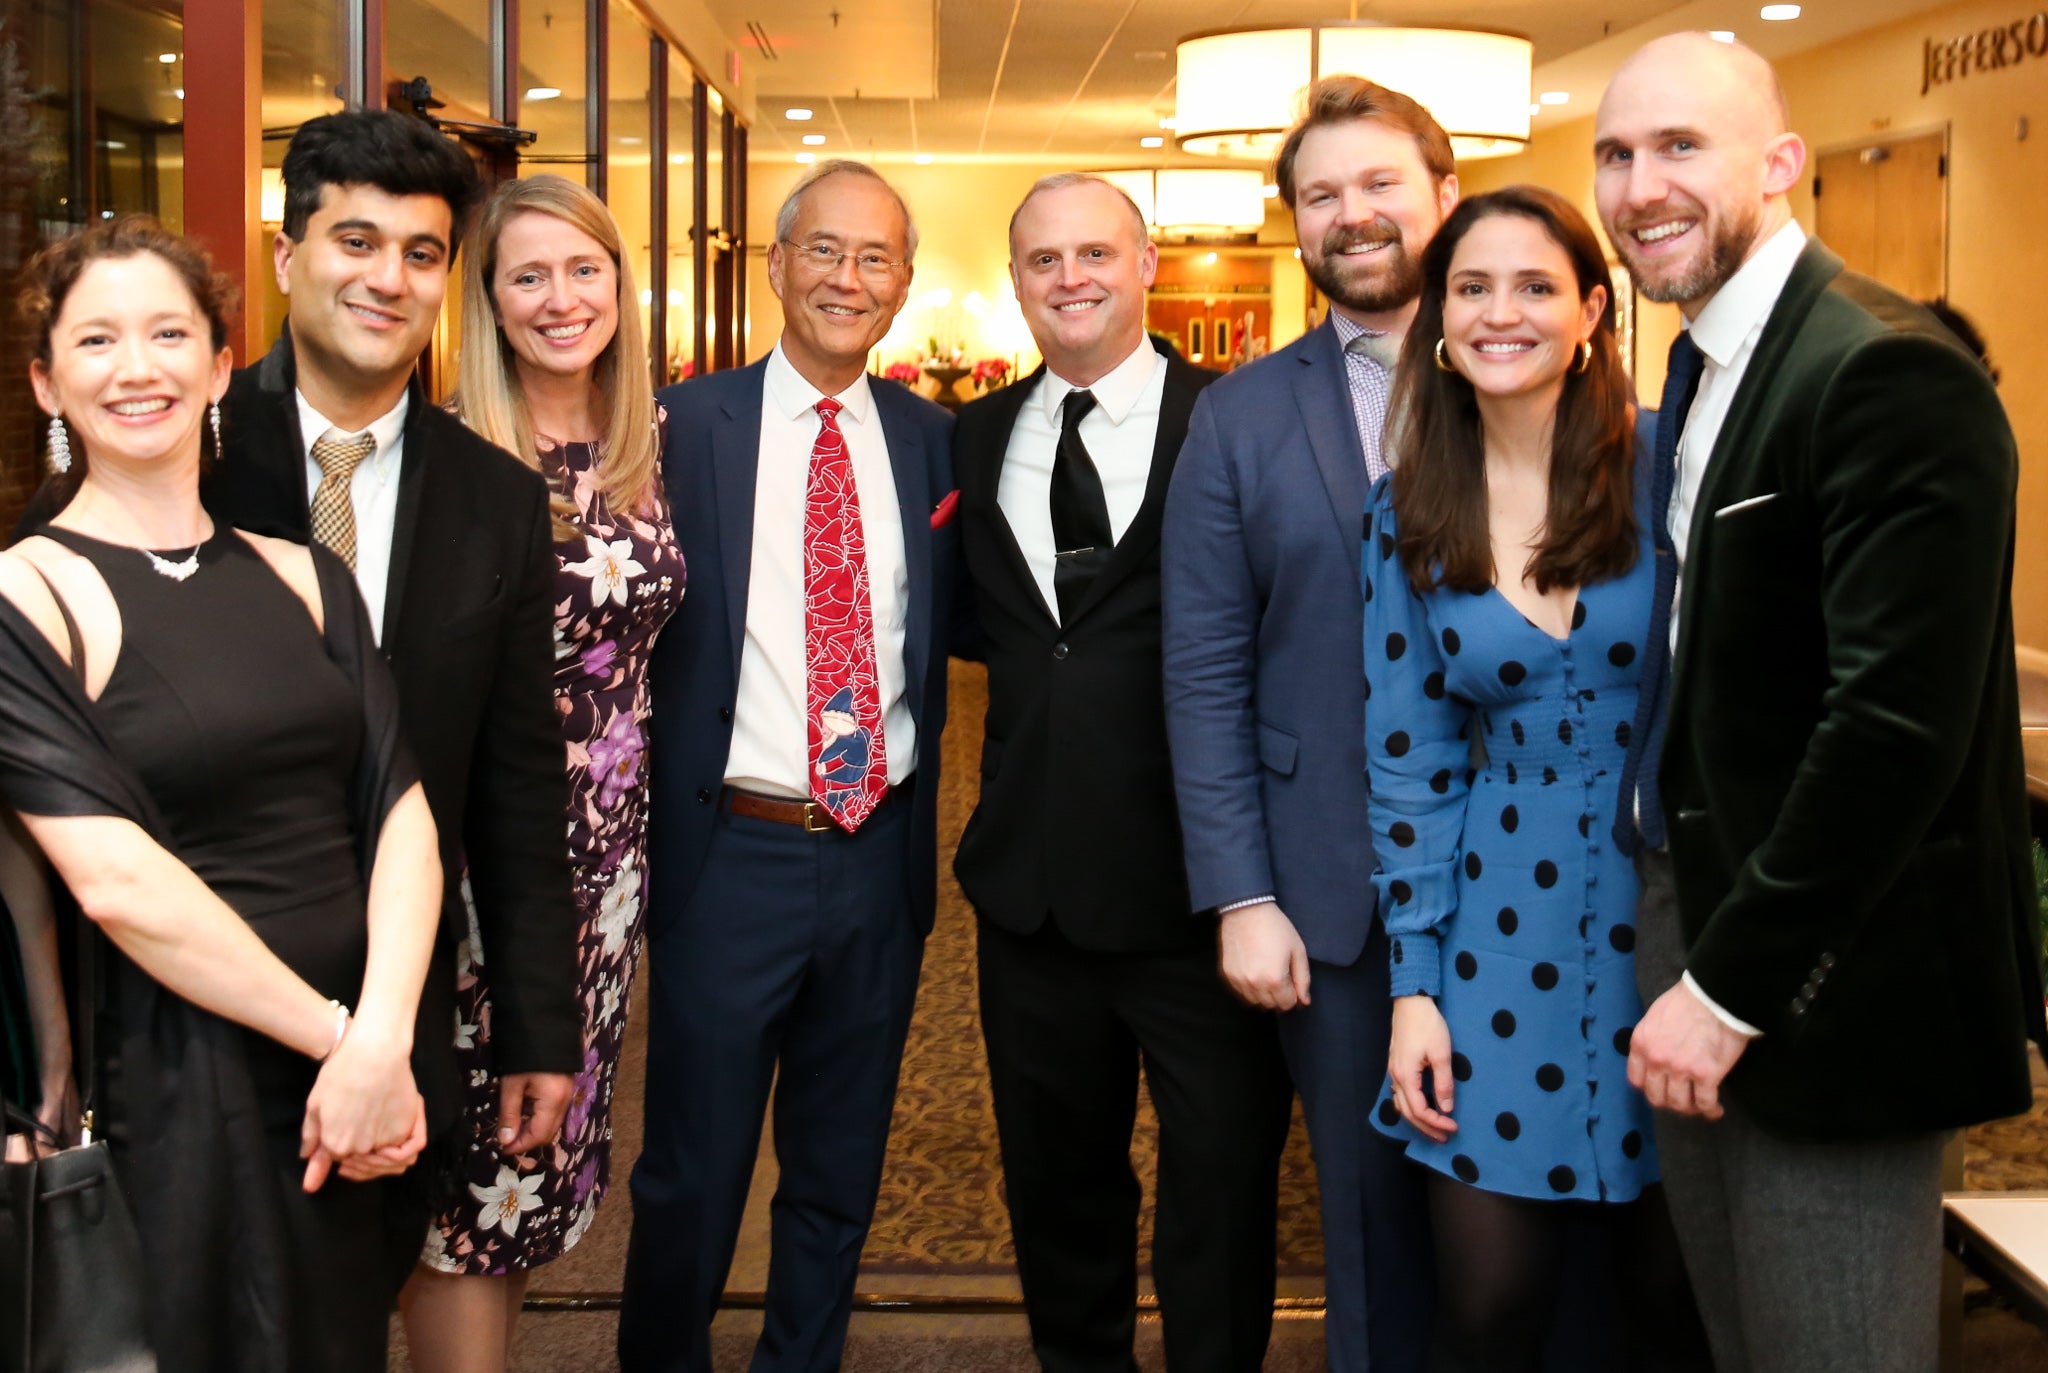 Department Chair Dr. Alan Matsumoto (center, red tie) stands with Dr. Carrie Rochman, left, and Dr. Drew Lambert, right, along with Radiology residents at the 2019 Department Holiday Party